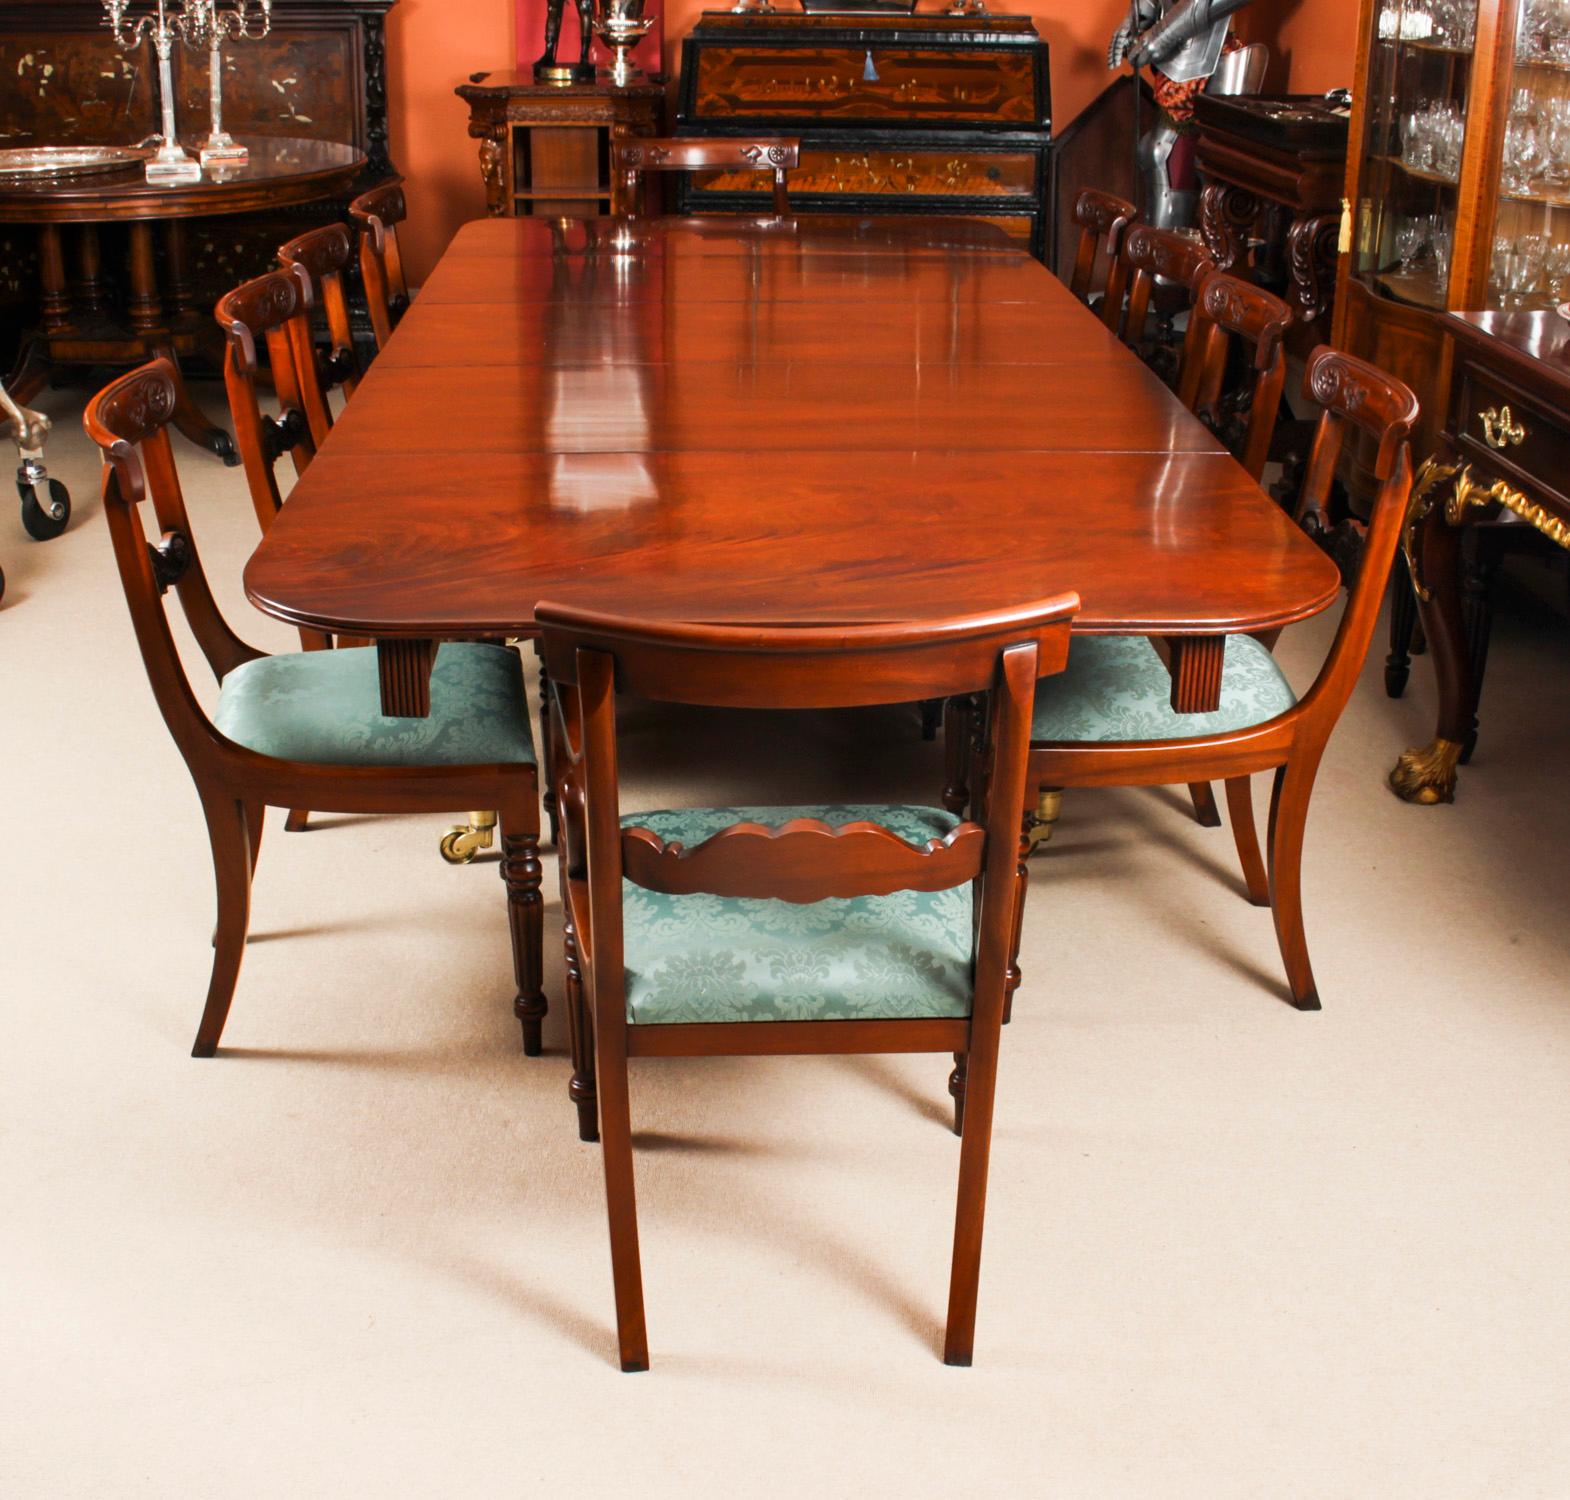 A very rare opportunity to own a fabulous dining set comprising an antique Regency dining table, Circa 1820 in date, and a set of twelve Vintage Regency Revival dining chairs.

The table is made of beautiful solid flame mahogany. This can be seen in